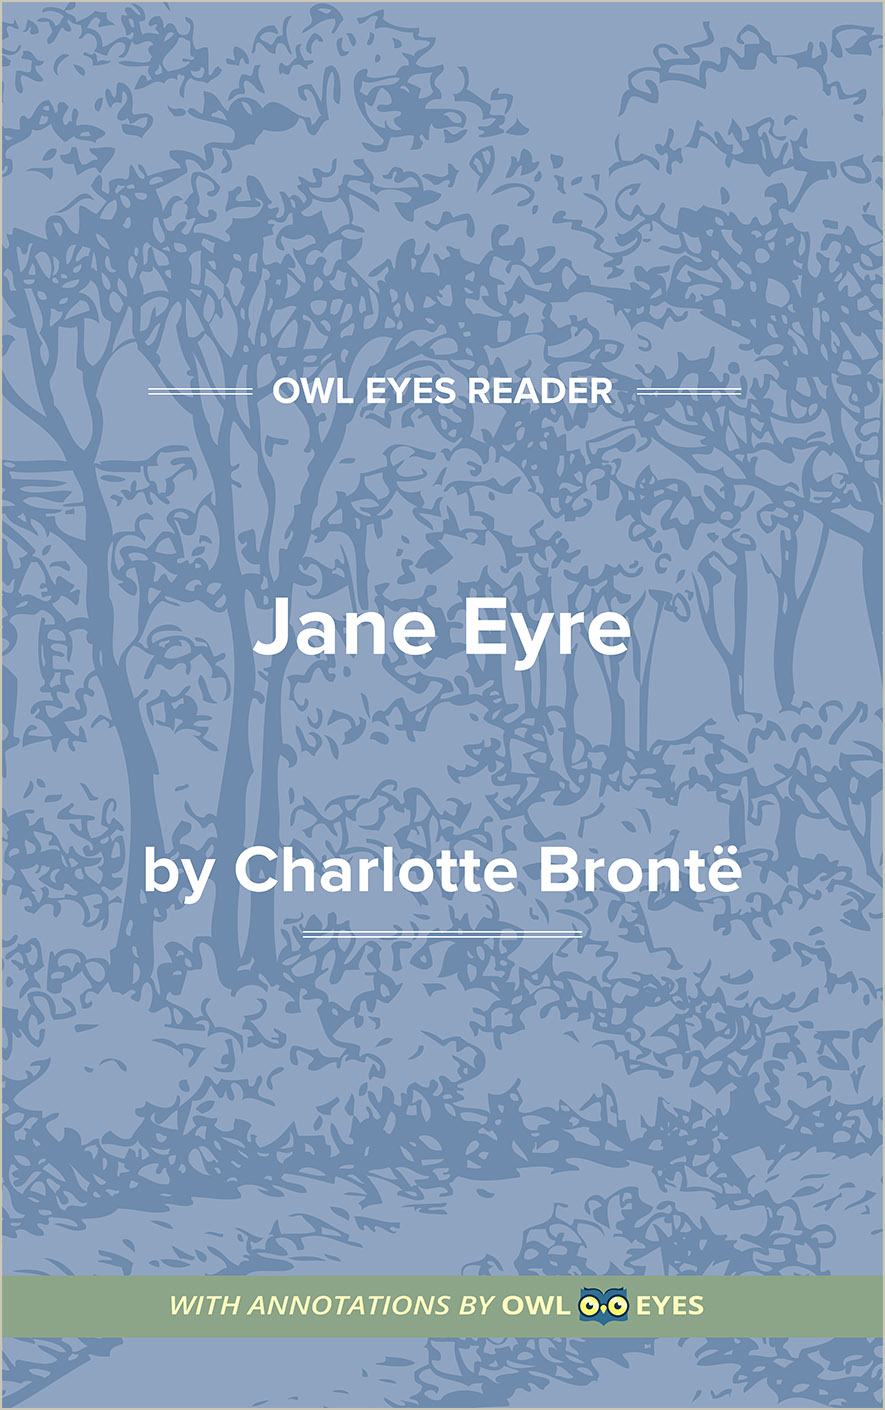 literary devices used in jane eyre